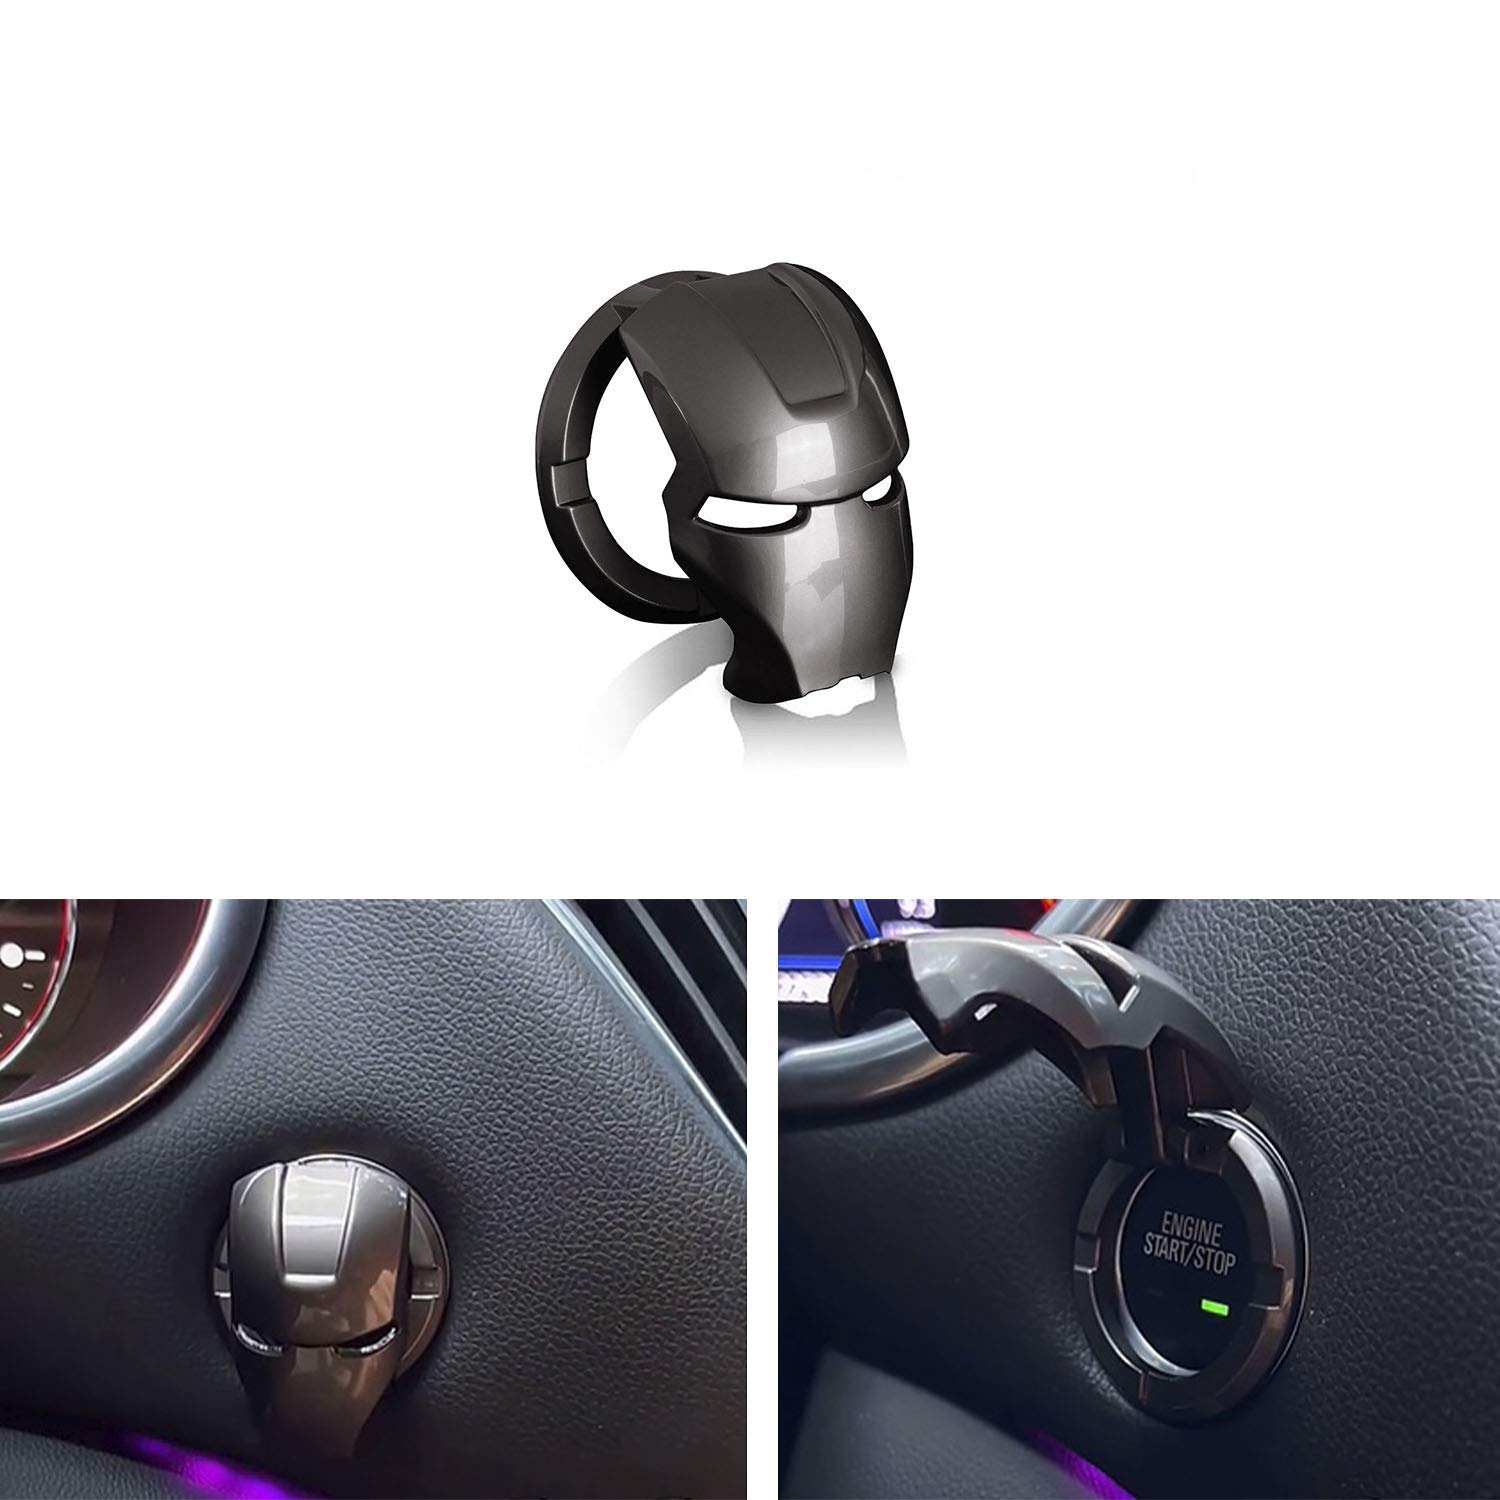 2 pcs Start Button for car Engine Start Button Switch Protection Ignition Protection car Interior Ignition Accessories Iron Man is Suitable for All Brands of Cars 